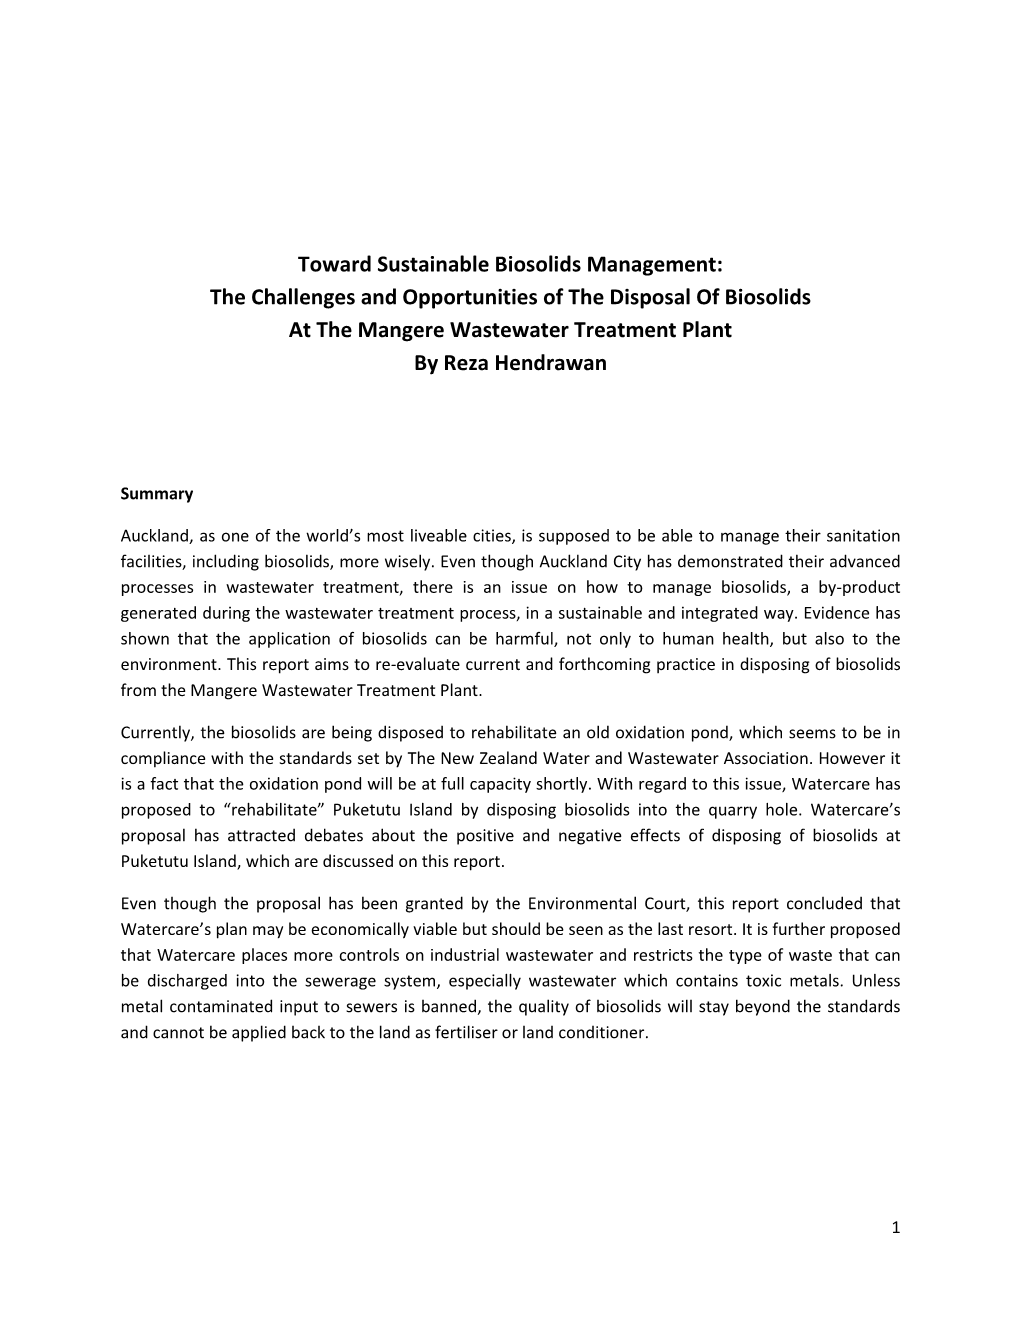 The Challenges and Opportunities of the Disposal of Biosolids at the Mangere Wastewater Treatment Plant by Reza Hendrawan